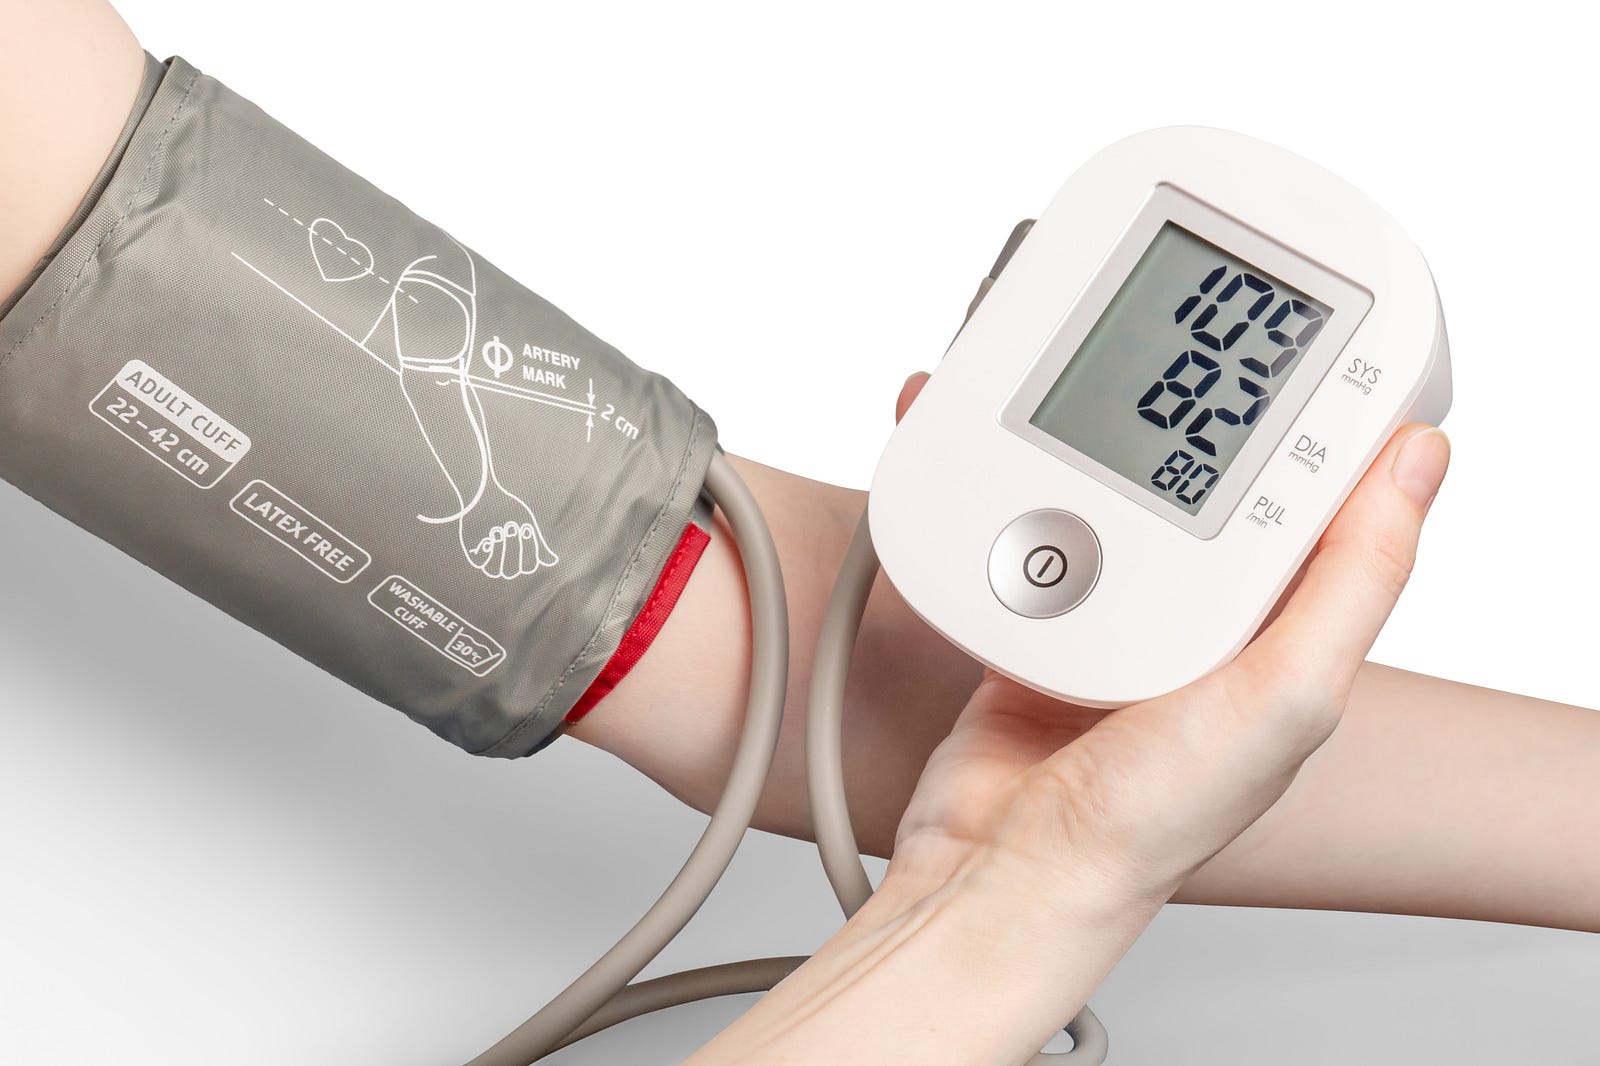 We see the arms of a person measuring their blood pressure with an automated device (on the left upper arm). The blood pressure device reads 109/82. I explore a study suggesting that as blood pressure rises above 90 mm, we risk damaging our heart’s blood vessels (coronary arteries).